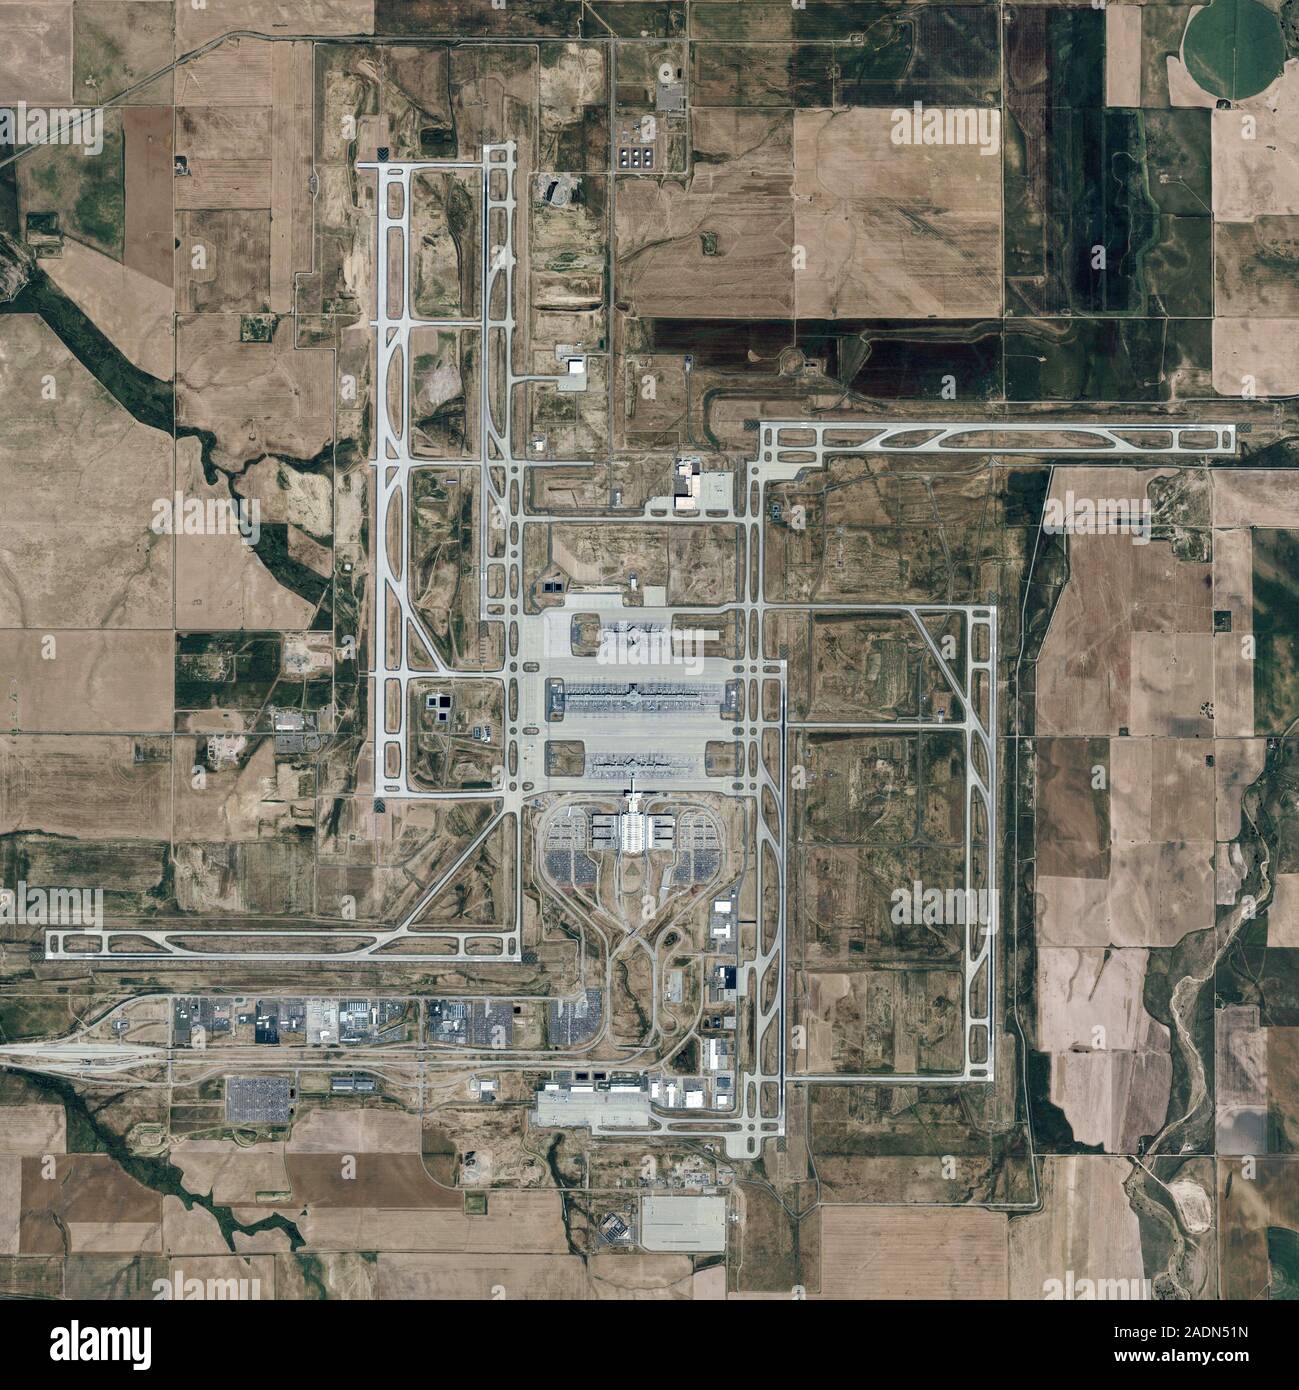 Albums 101+ Images aerial view of denver airport runways Latest